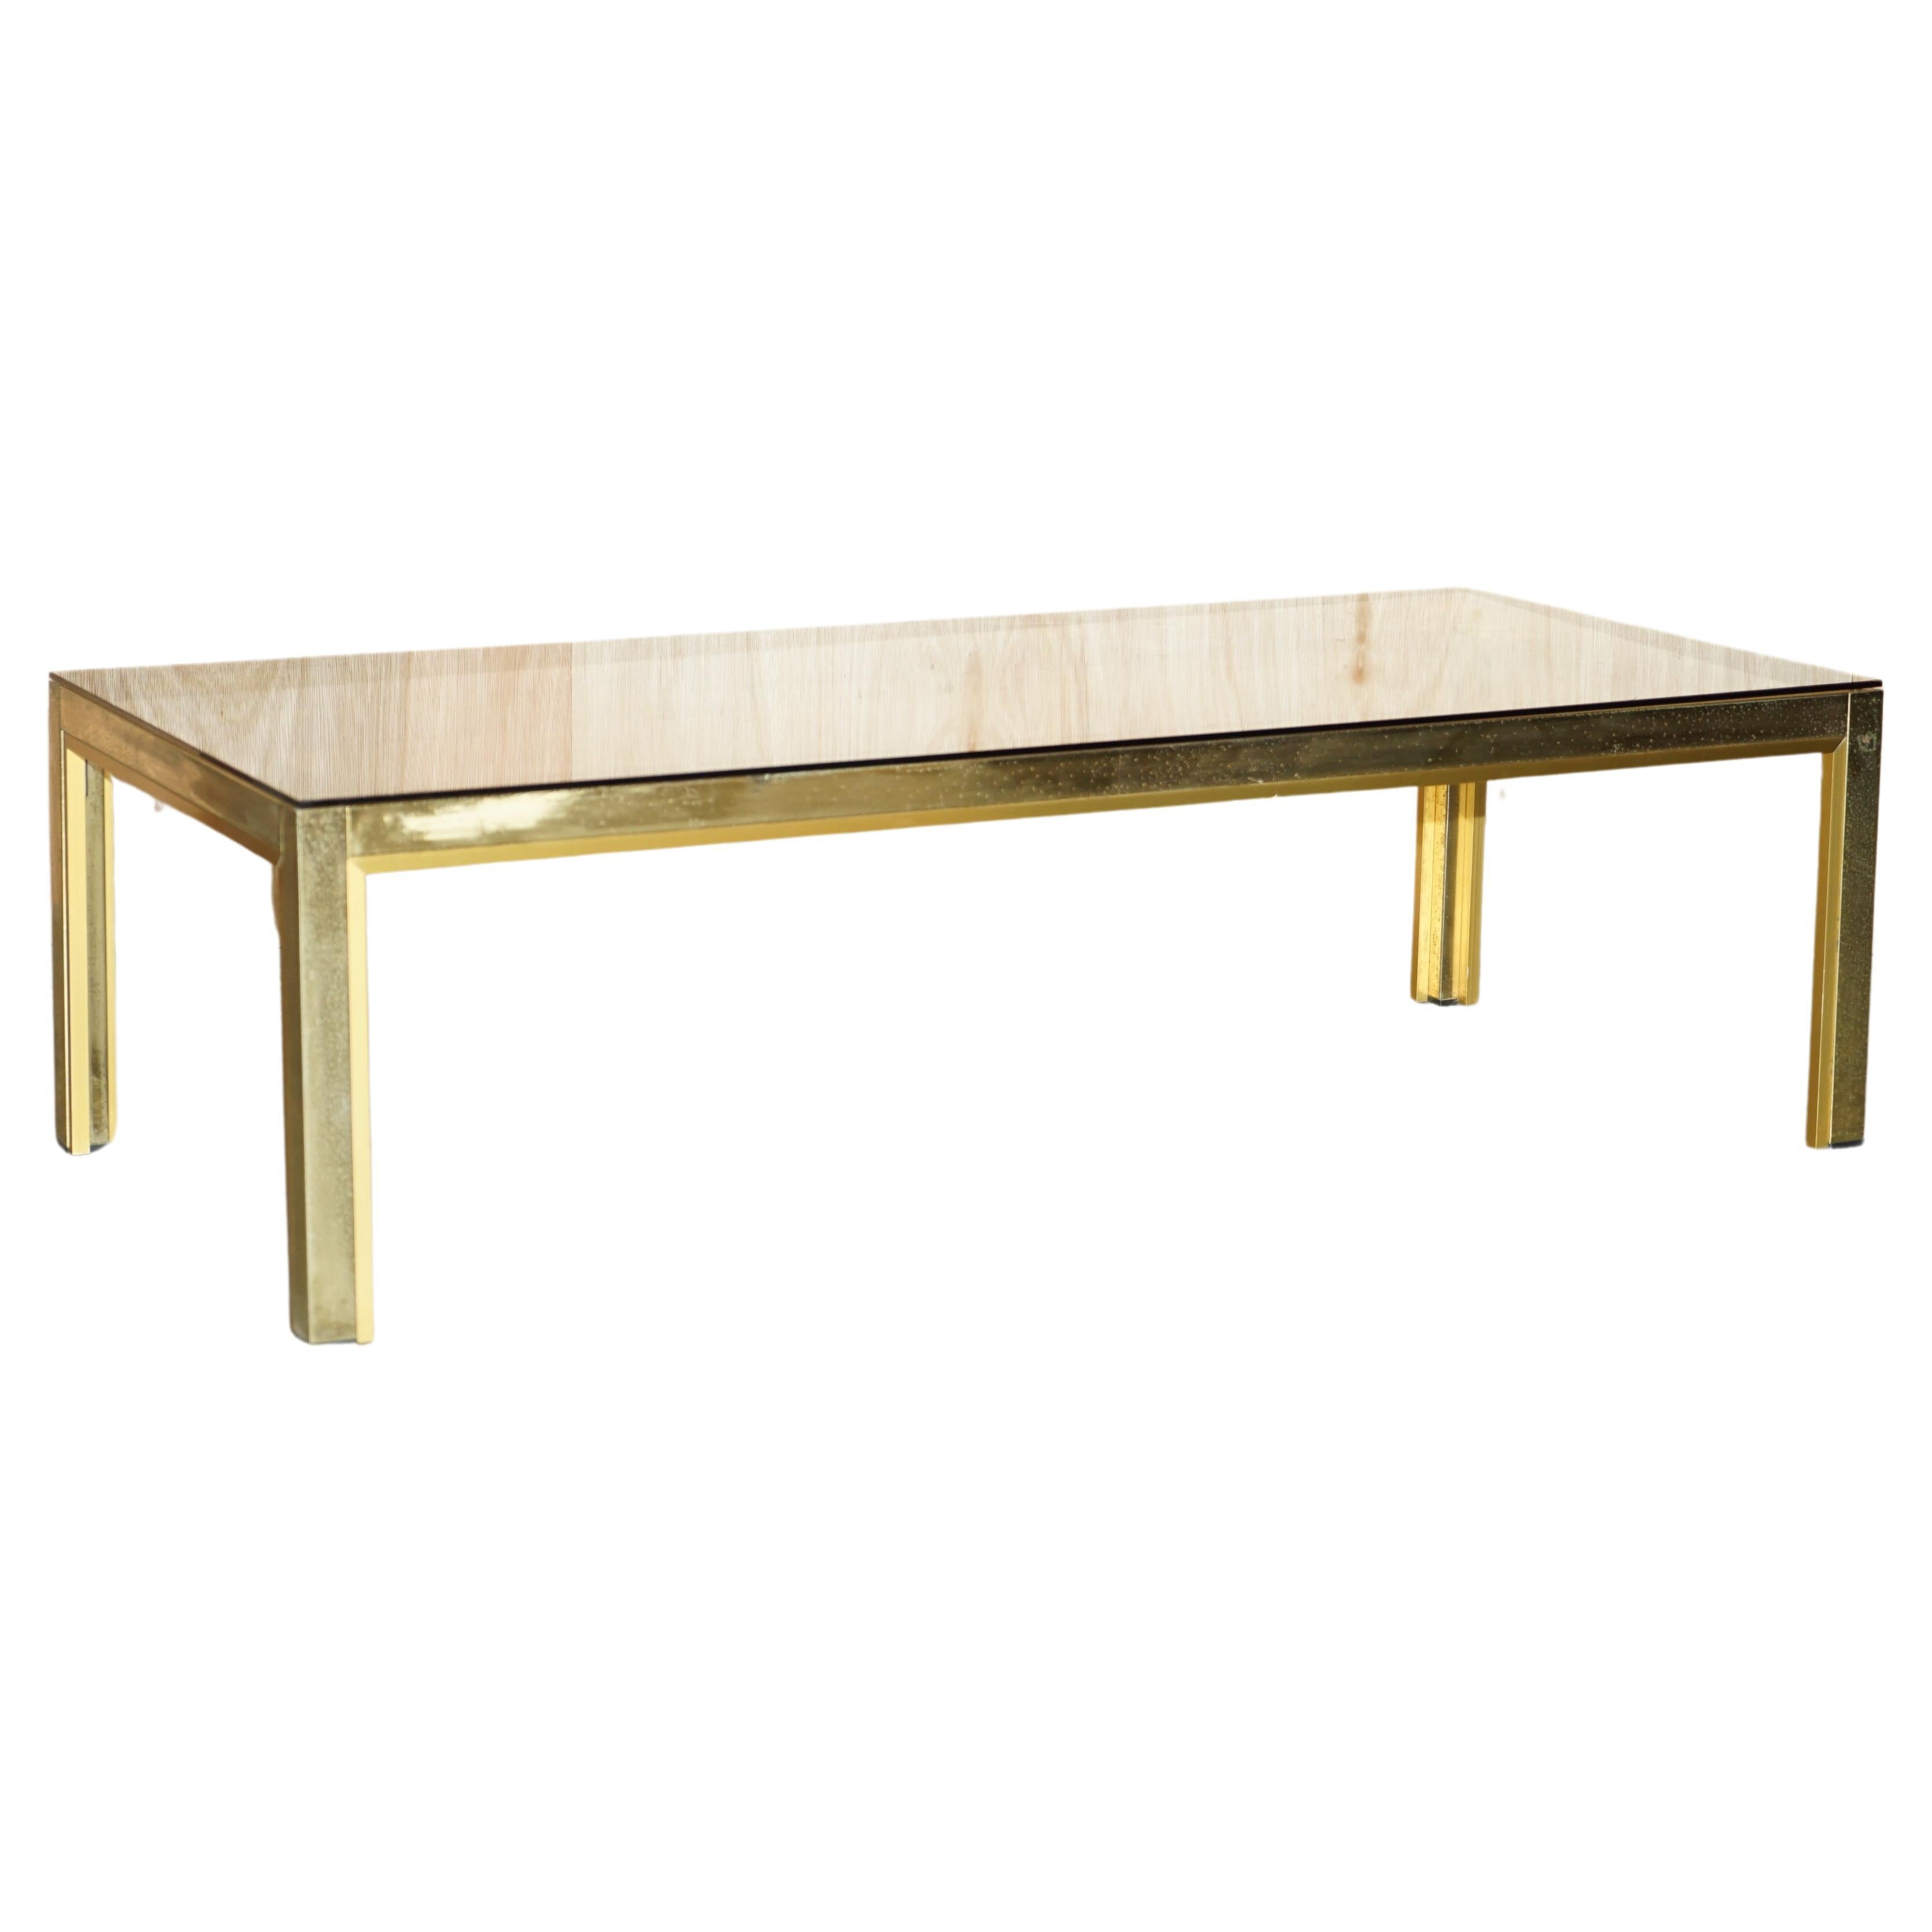 circa 1950's Mid-Century Modern Brass & Glass Coffee Cocktail Table Part Suite